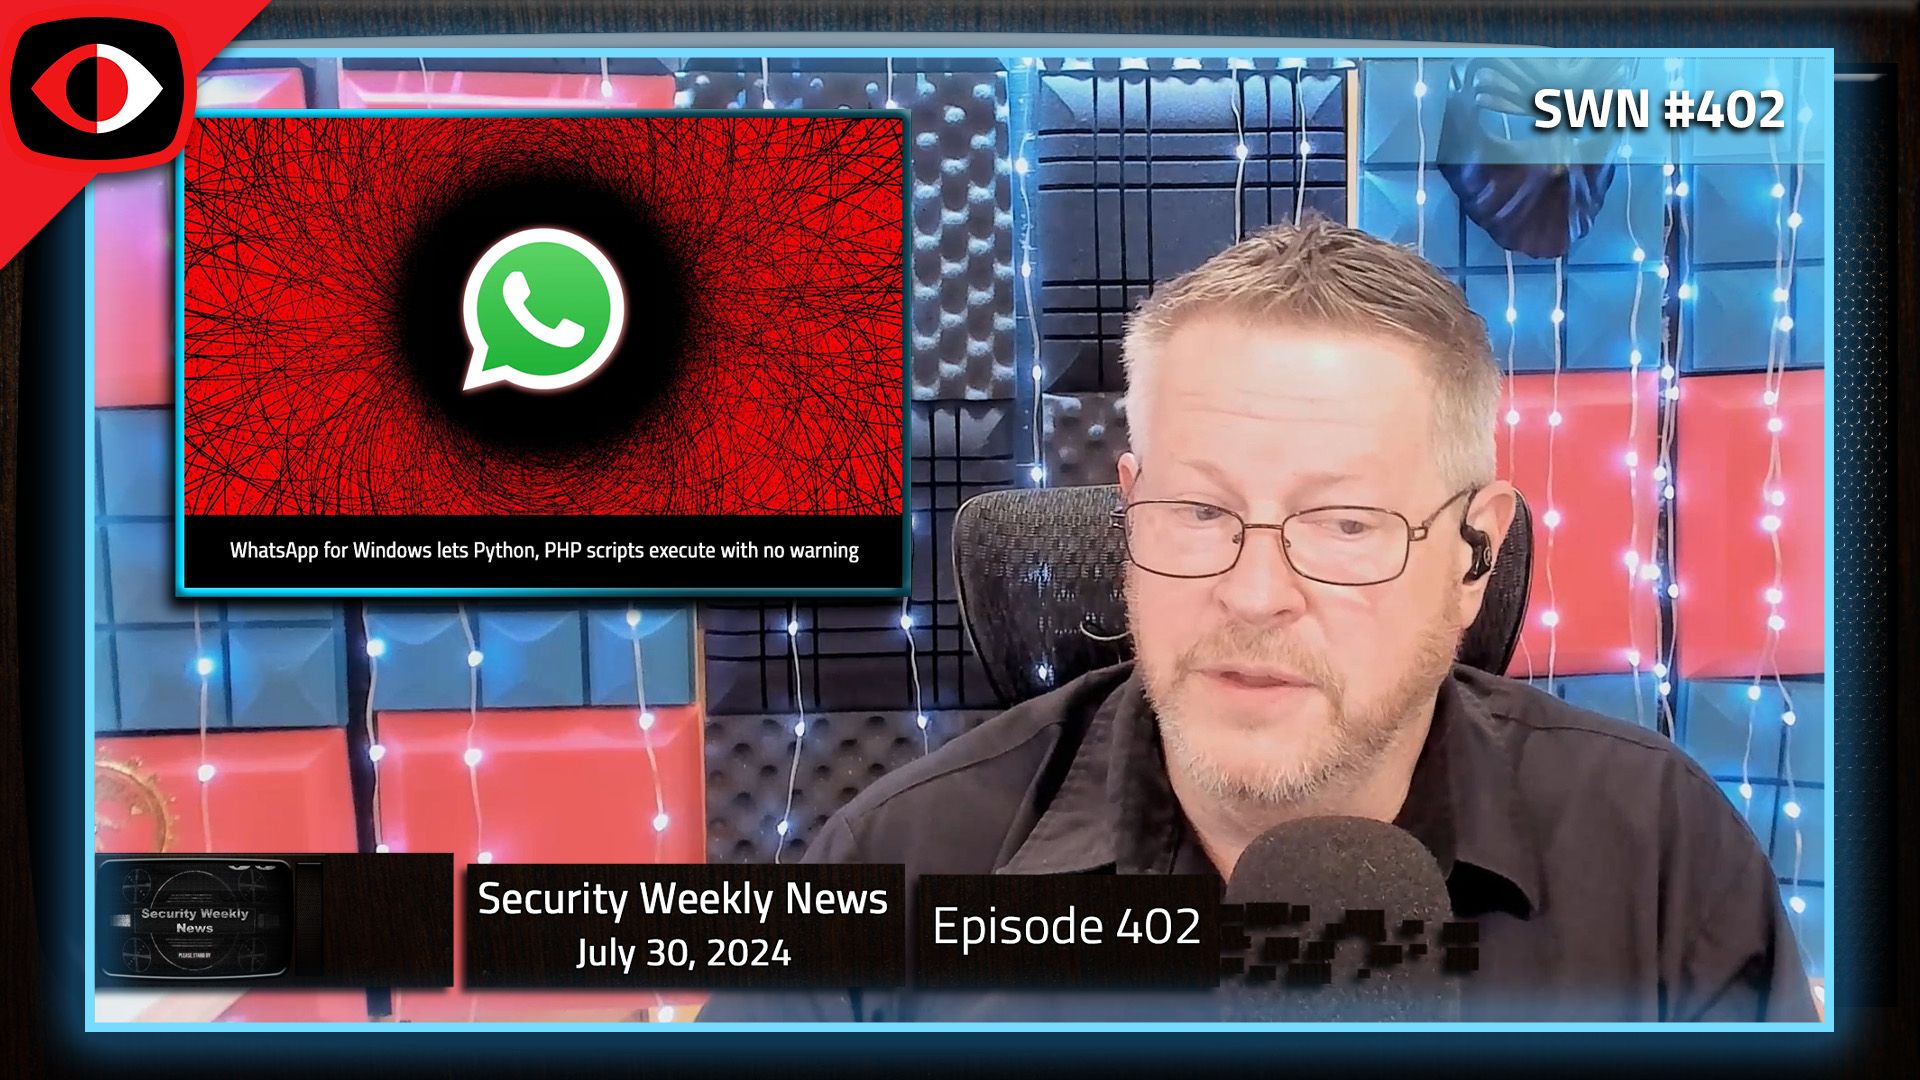 Forever mouse, RPC, WhatsApp, NIST, PKFail, 0Auth, Josh Marpet, and More… – SWN #402